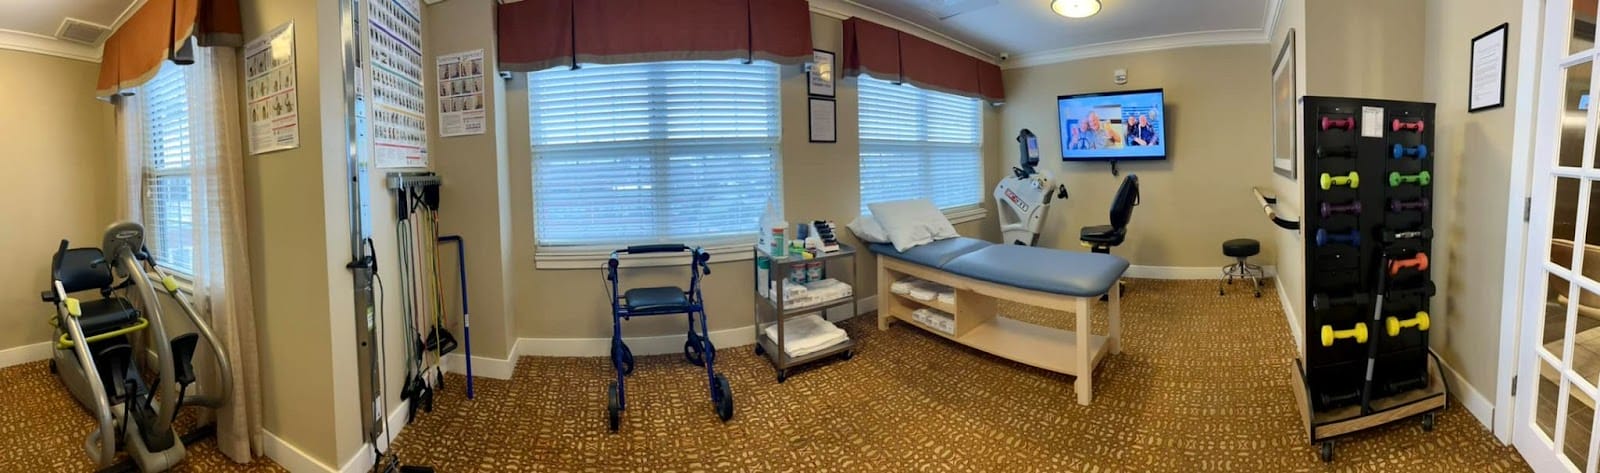 A landscape picture of the inside of a physical therapy clinic